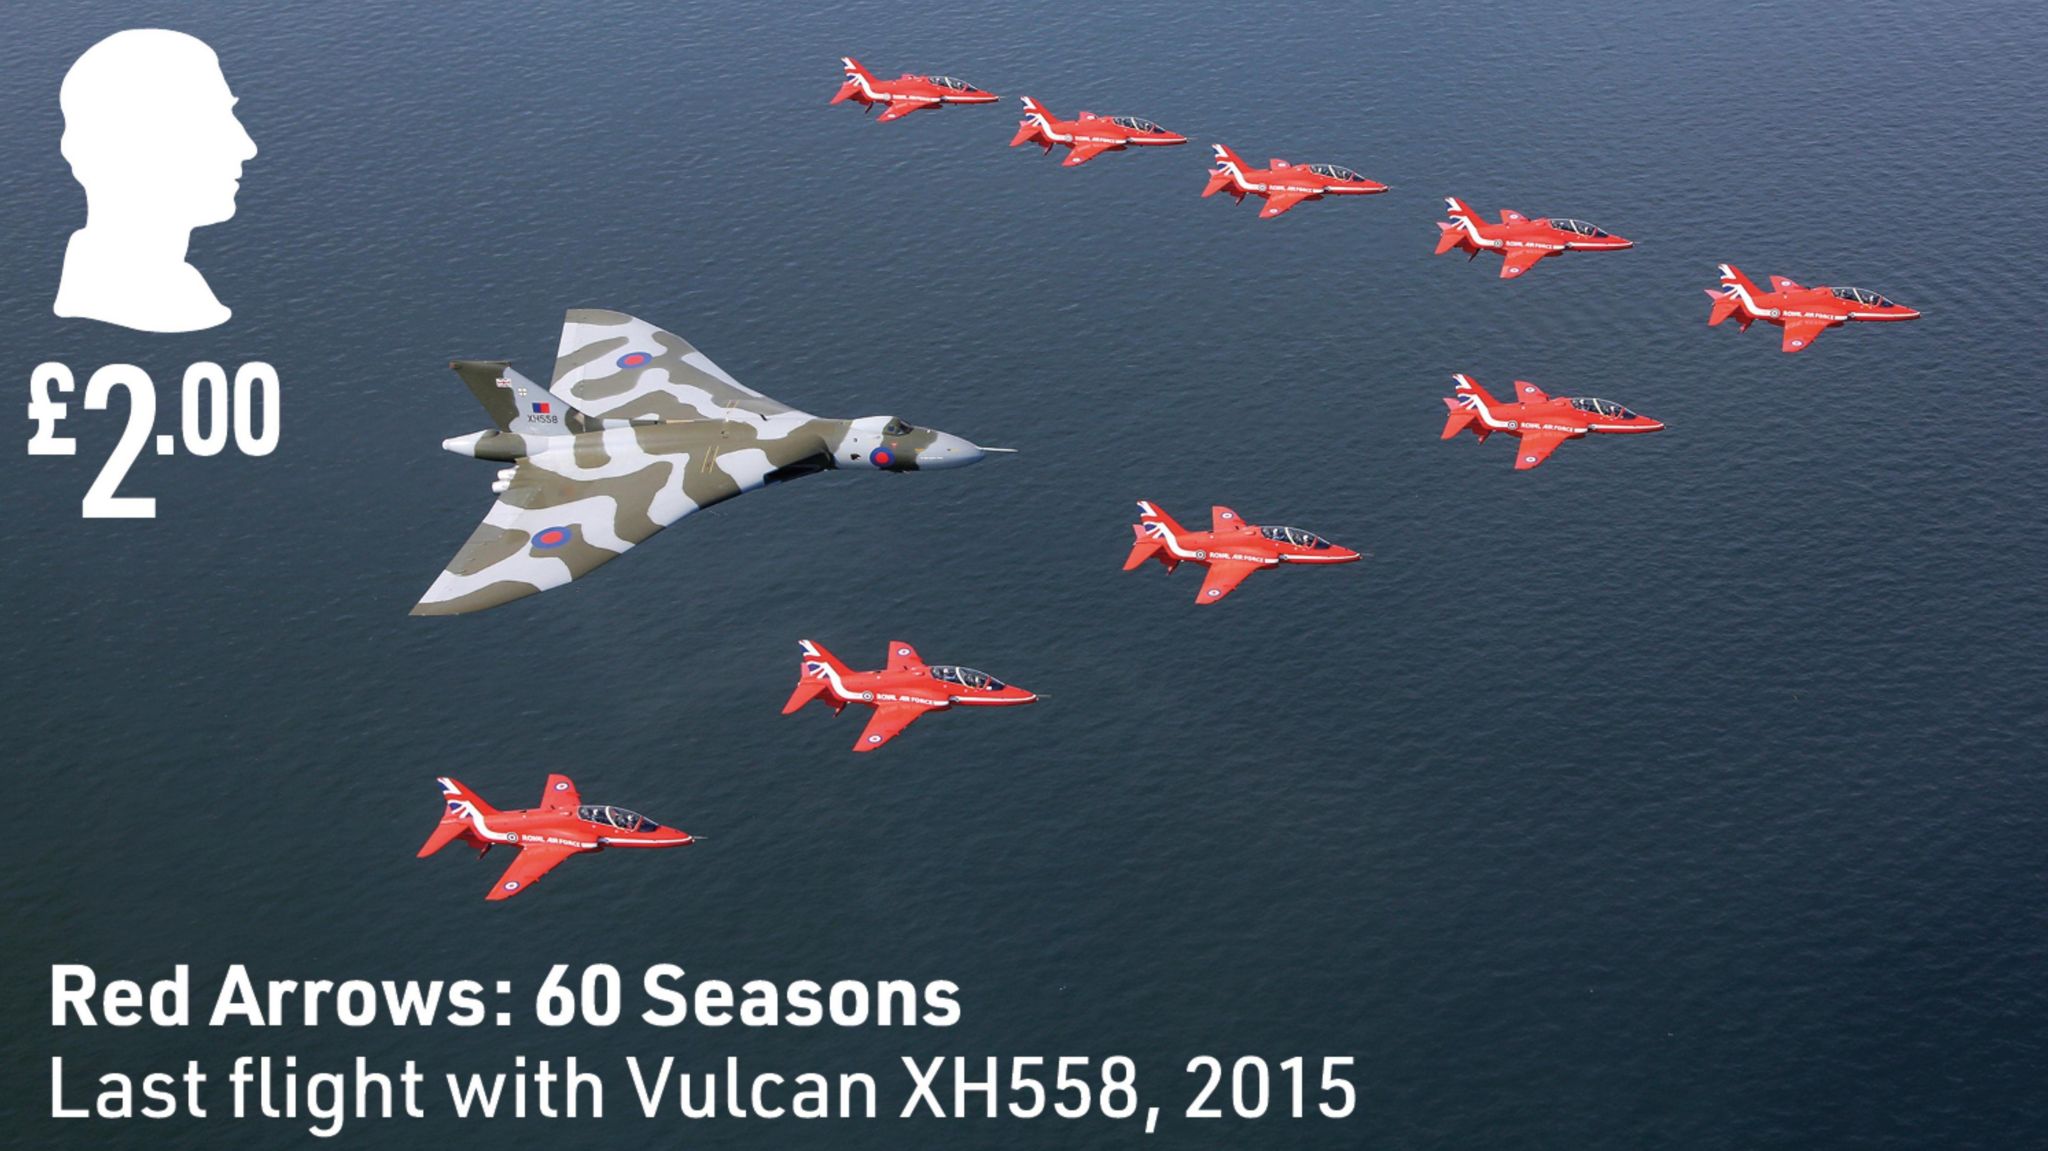 A stamp showing the Red Arrows with a Vulcan bomber on its final flight in 2015